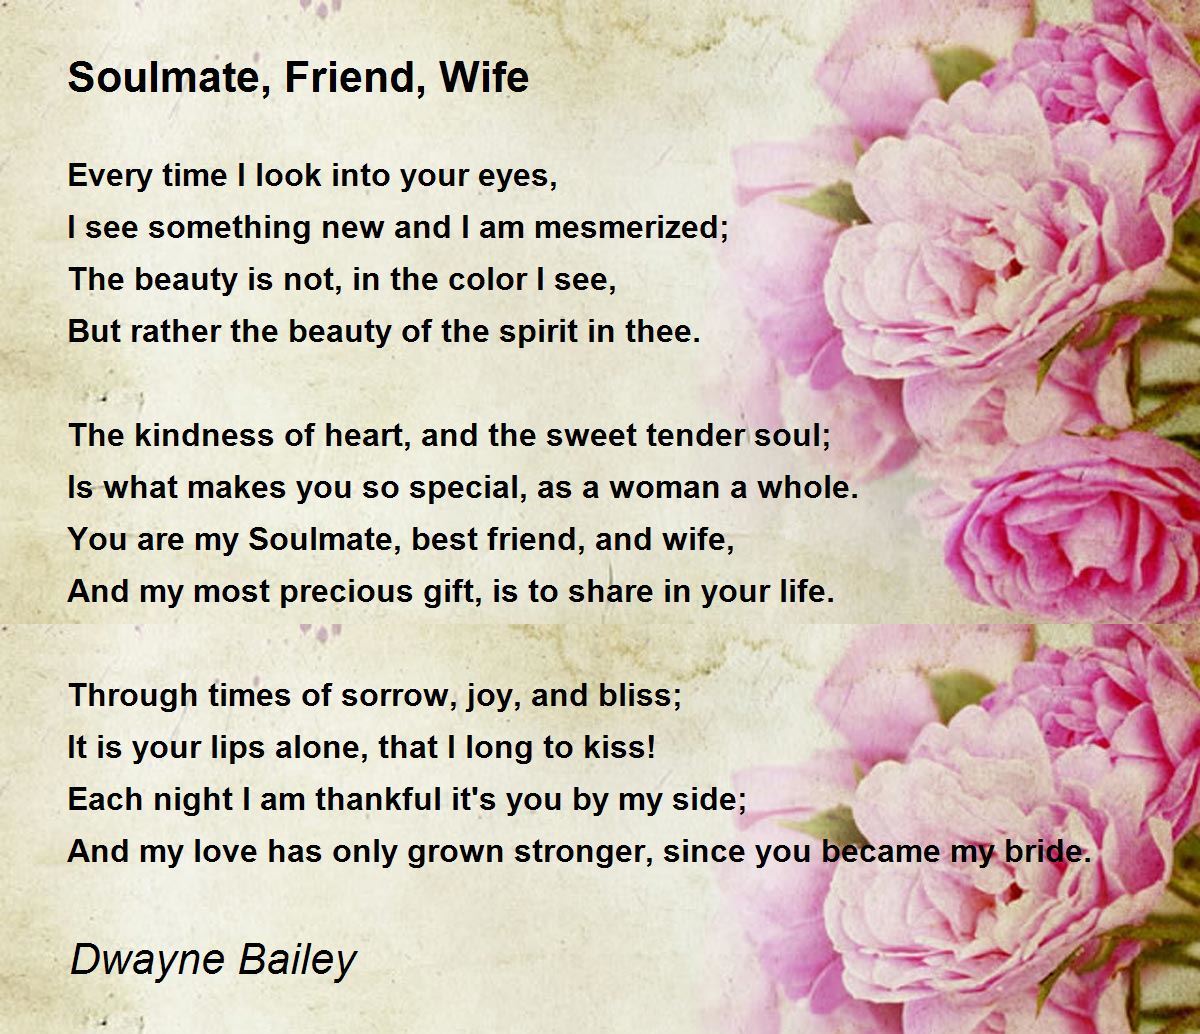 20 Best Soulmate Love Poems For Your Husband